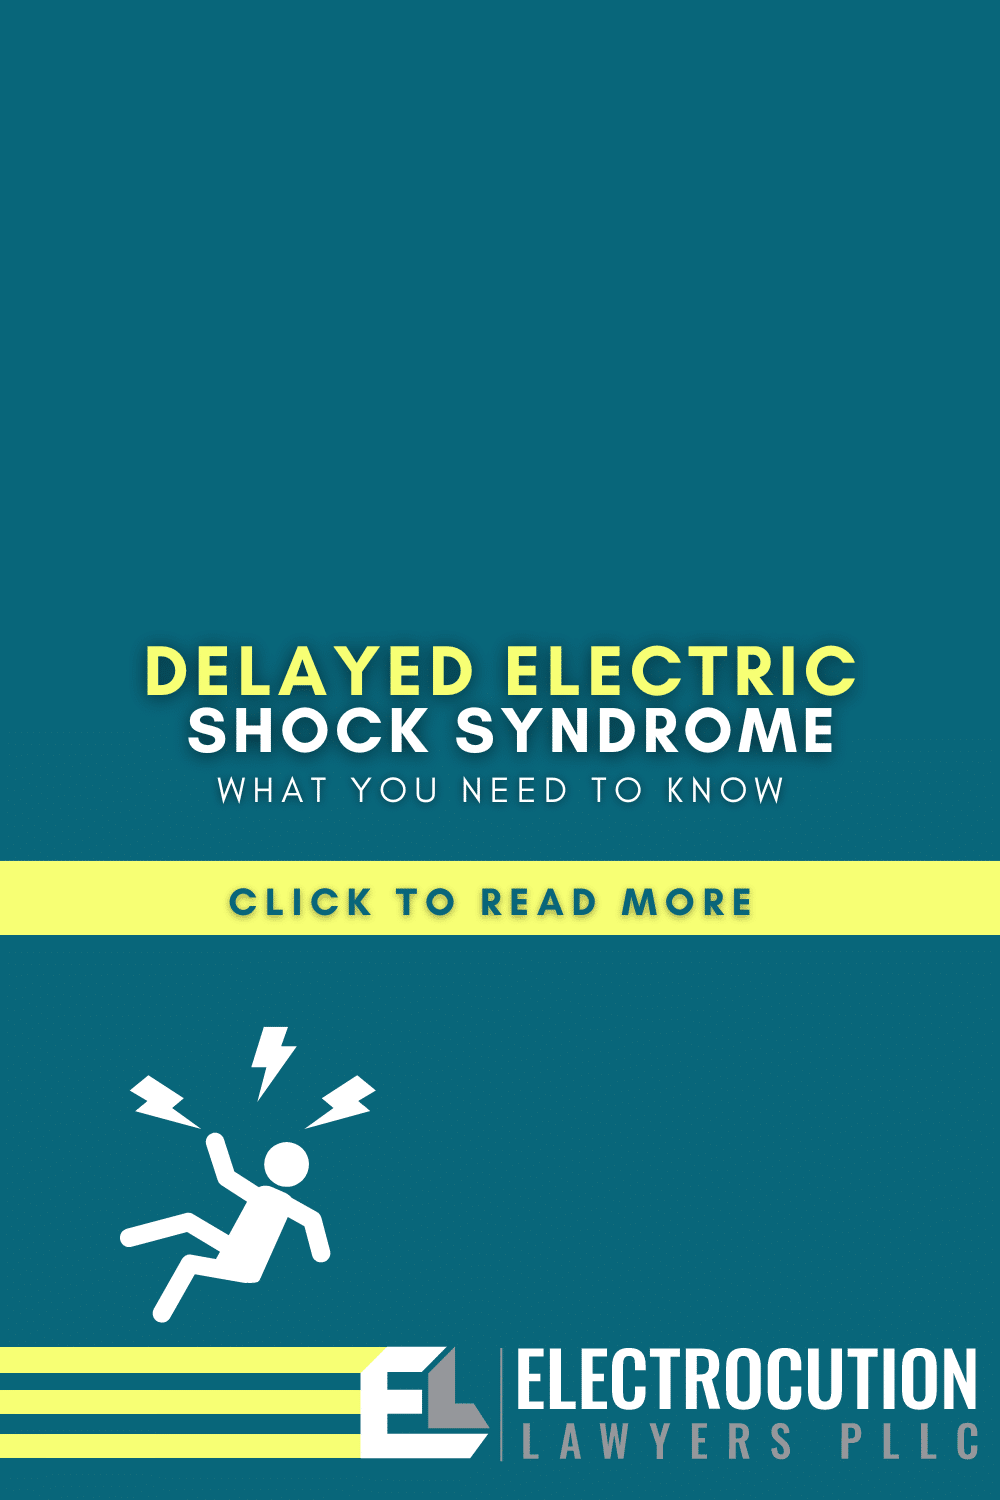 Delayed Electric Shock Symptoms: What You Need To Know